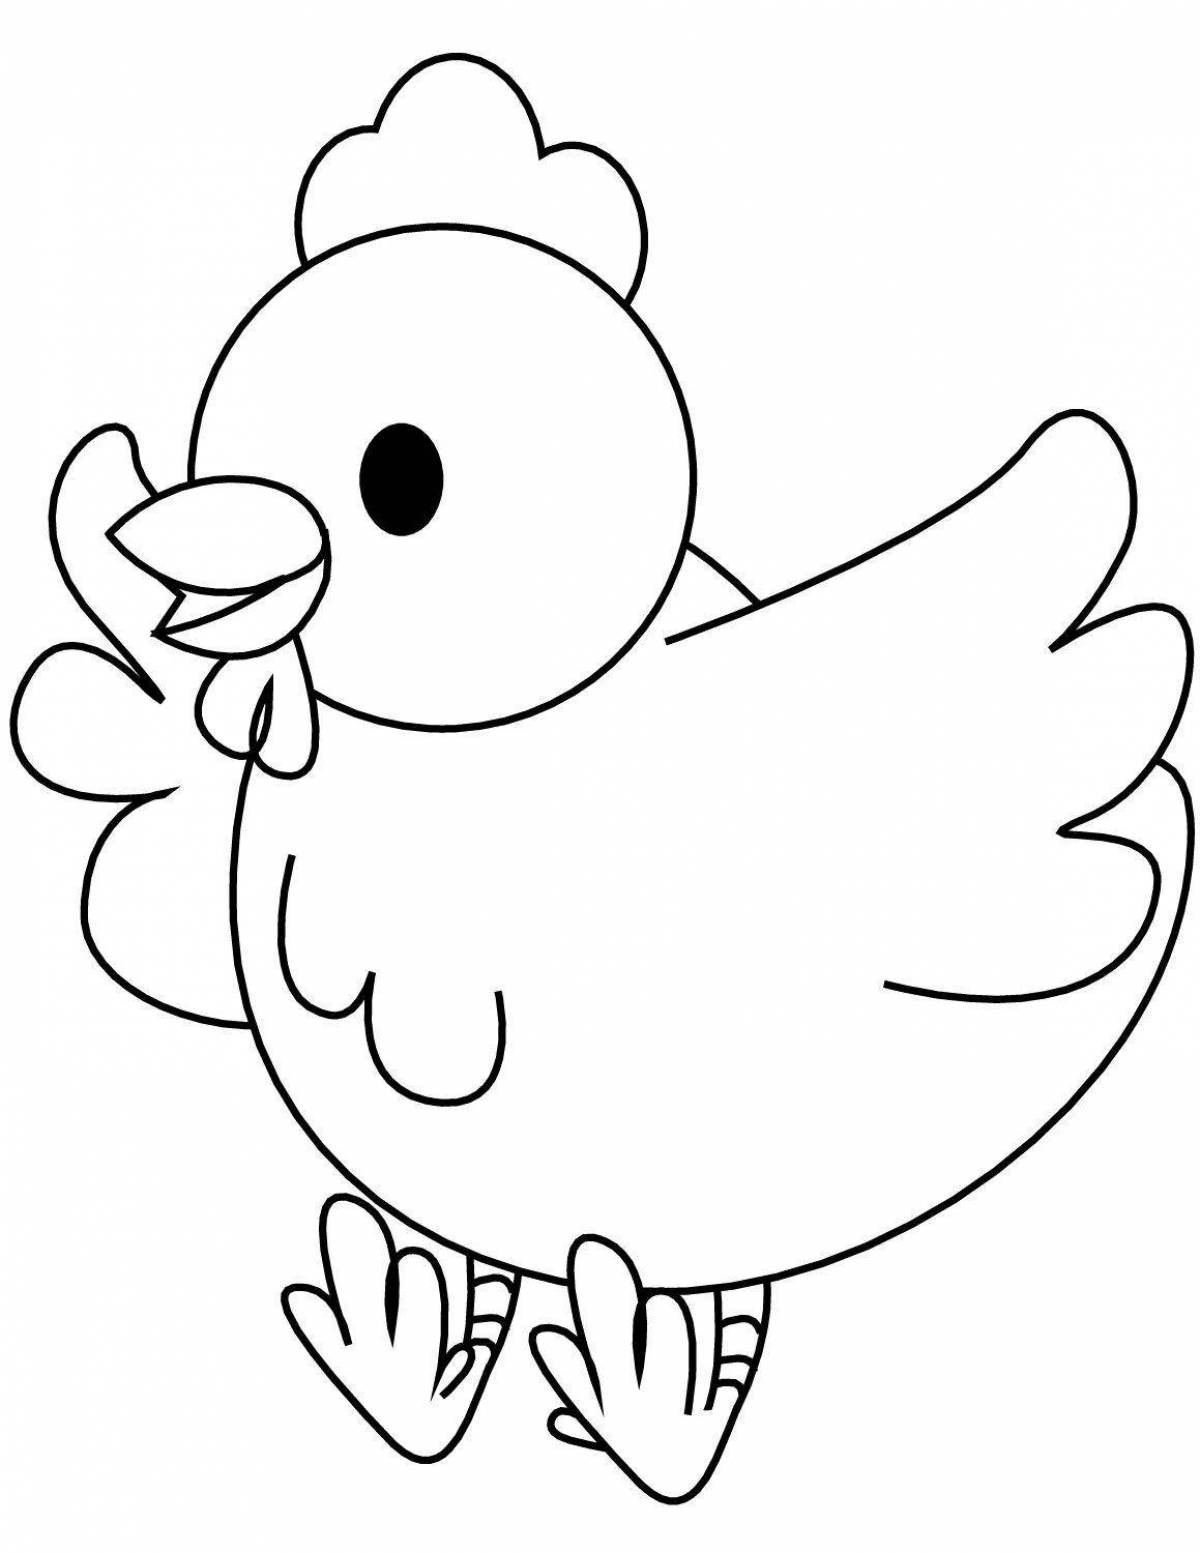 Incredible chick coloring book